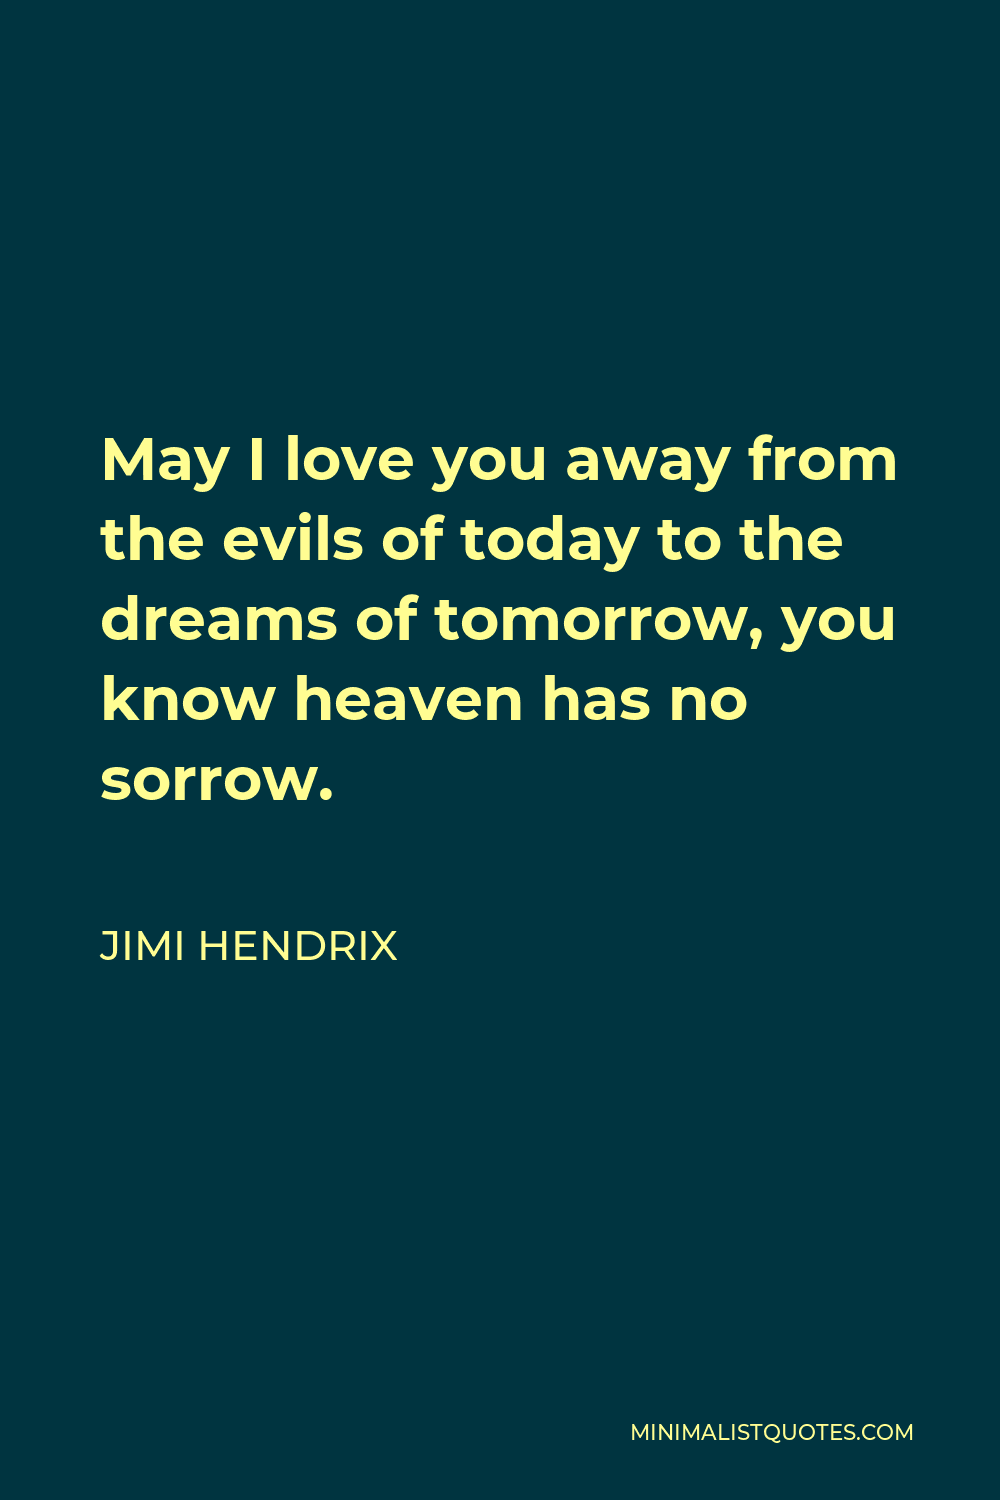 Jimi Hendrix Quote - May I love you away from the evils of today to the dreams of tomorrow, you know heaven has no sorrow.